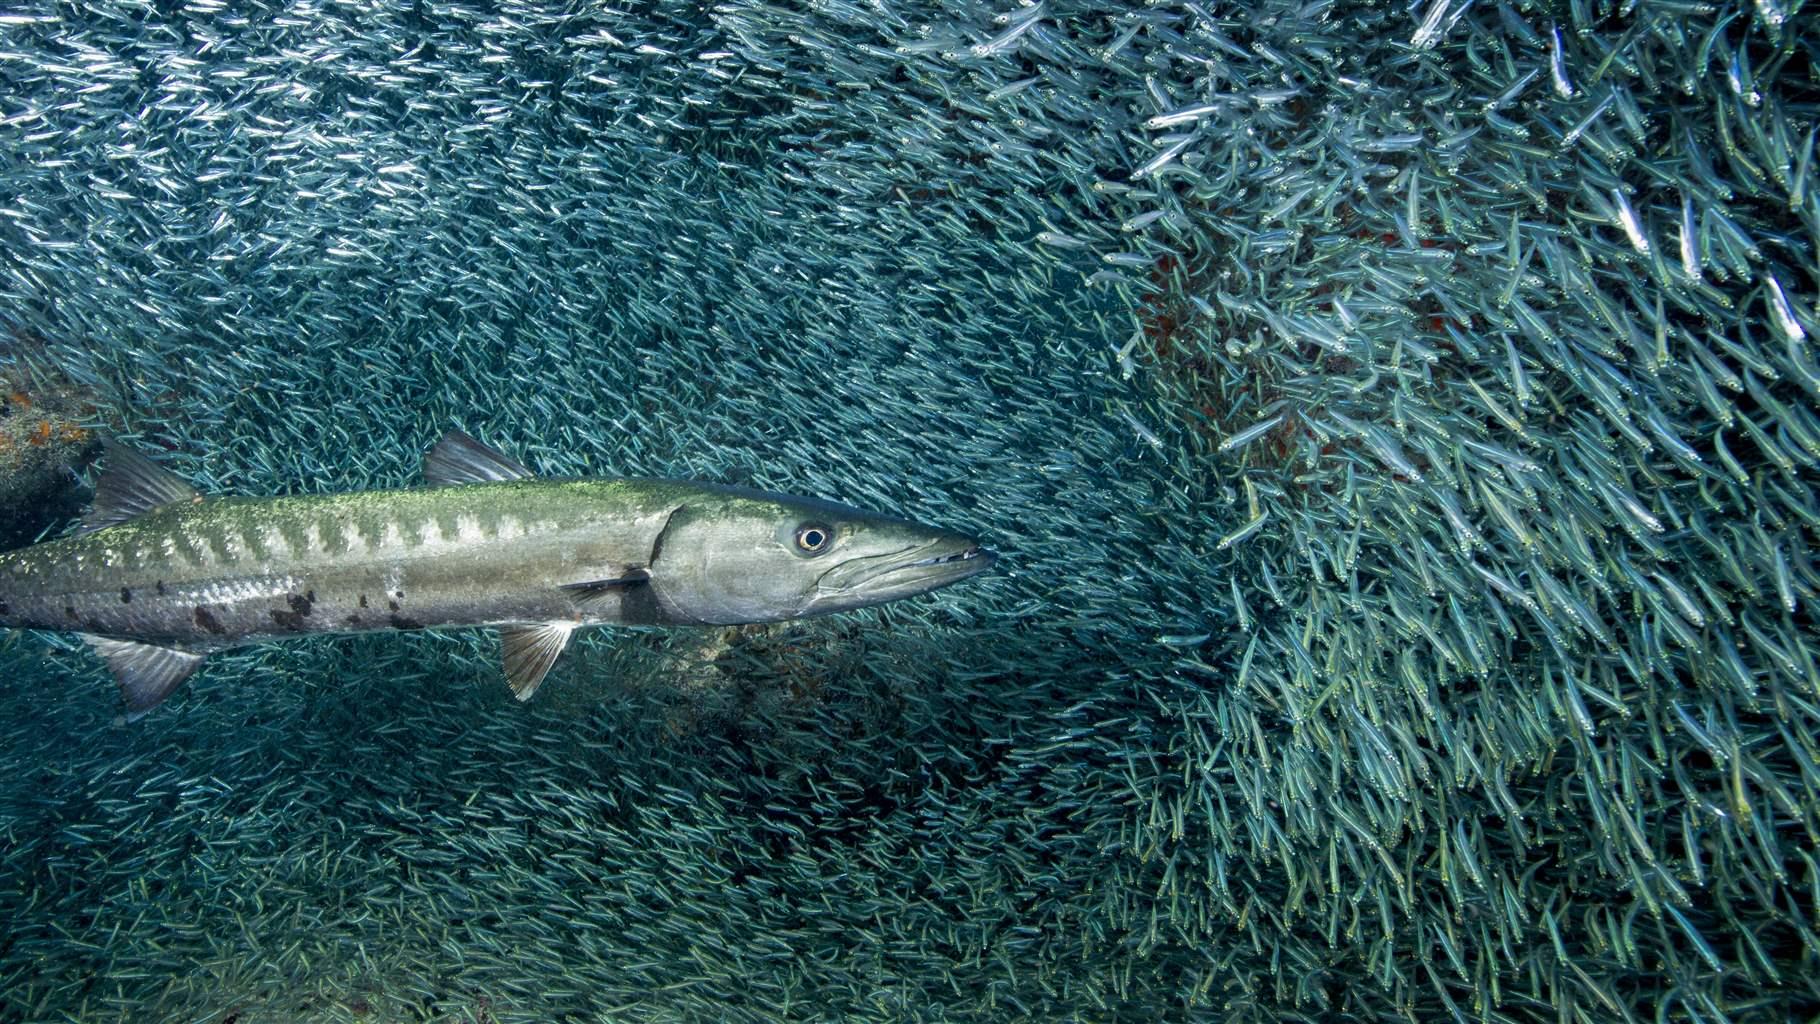 Forage Fish That Fuel the Ocean Food Web Need More Than Patchwork